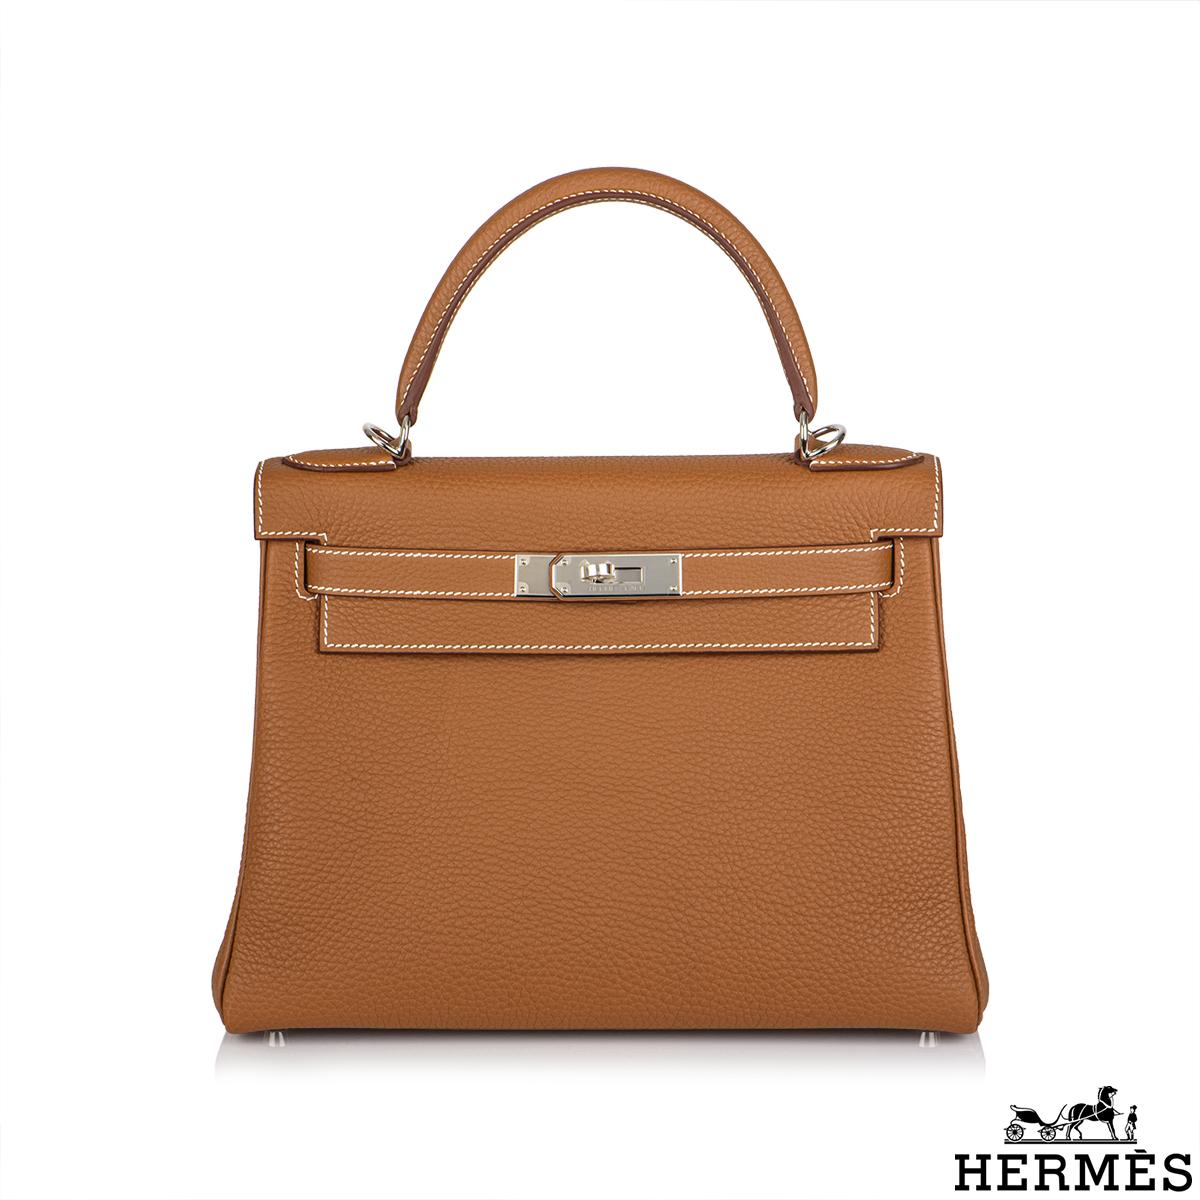 A classic Hermès Kelly II Retourne 28cm handbag. The gold togo leather bag is detailed with palladium hardware. The exterior of this Kelly features a Retourne style in togo leather. It has a front toggle closure, a single rolled handle and tonal